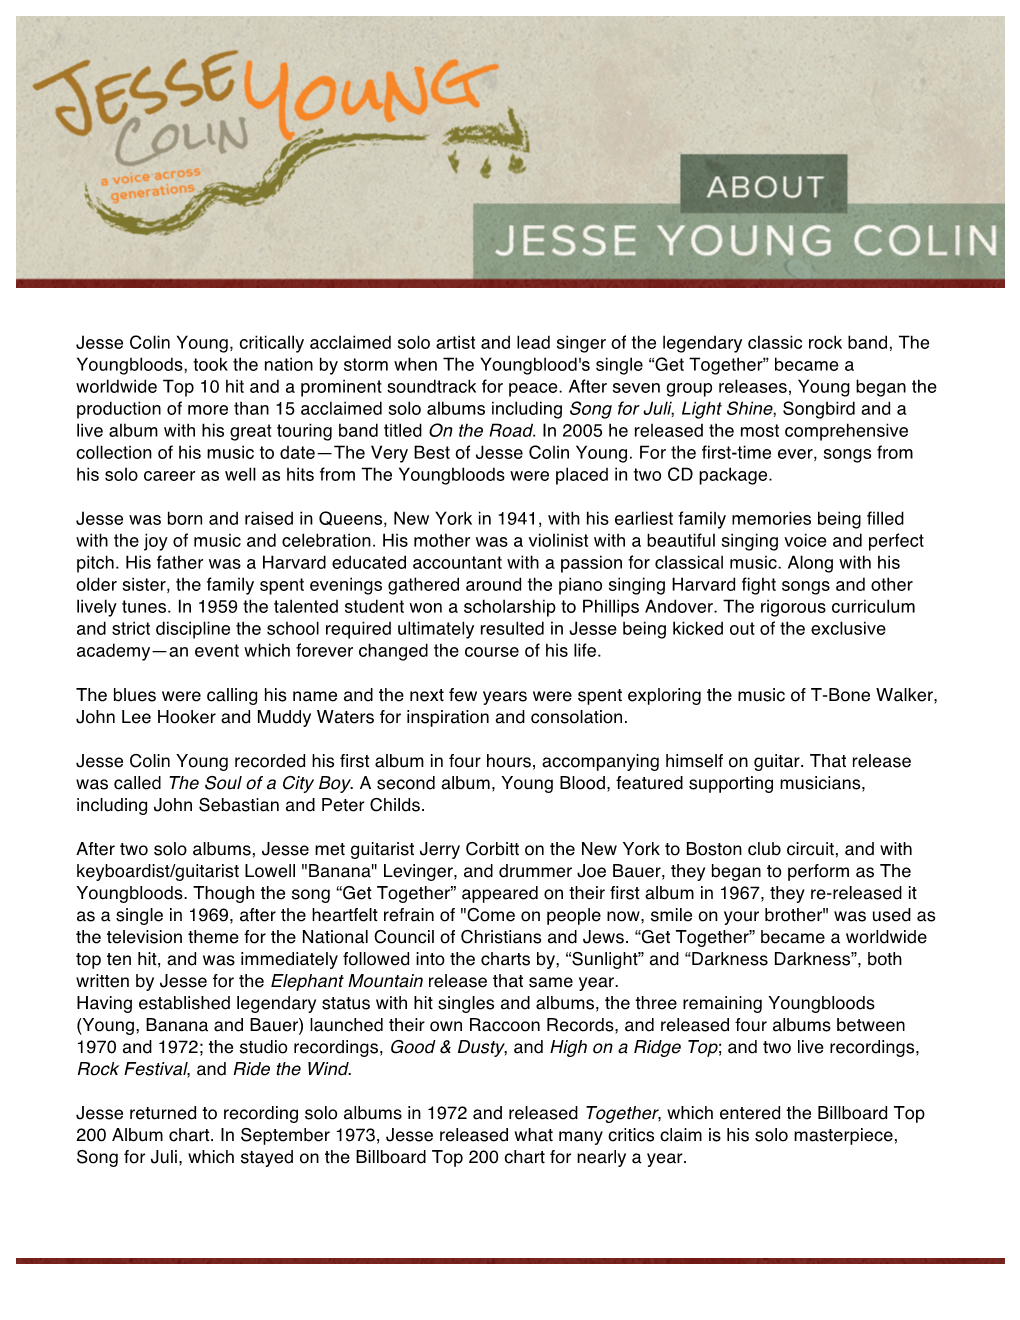 Jesse Colin Young, Critically Acclaimed Solo Artist and Lead